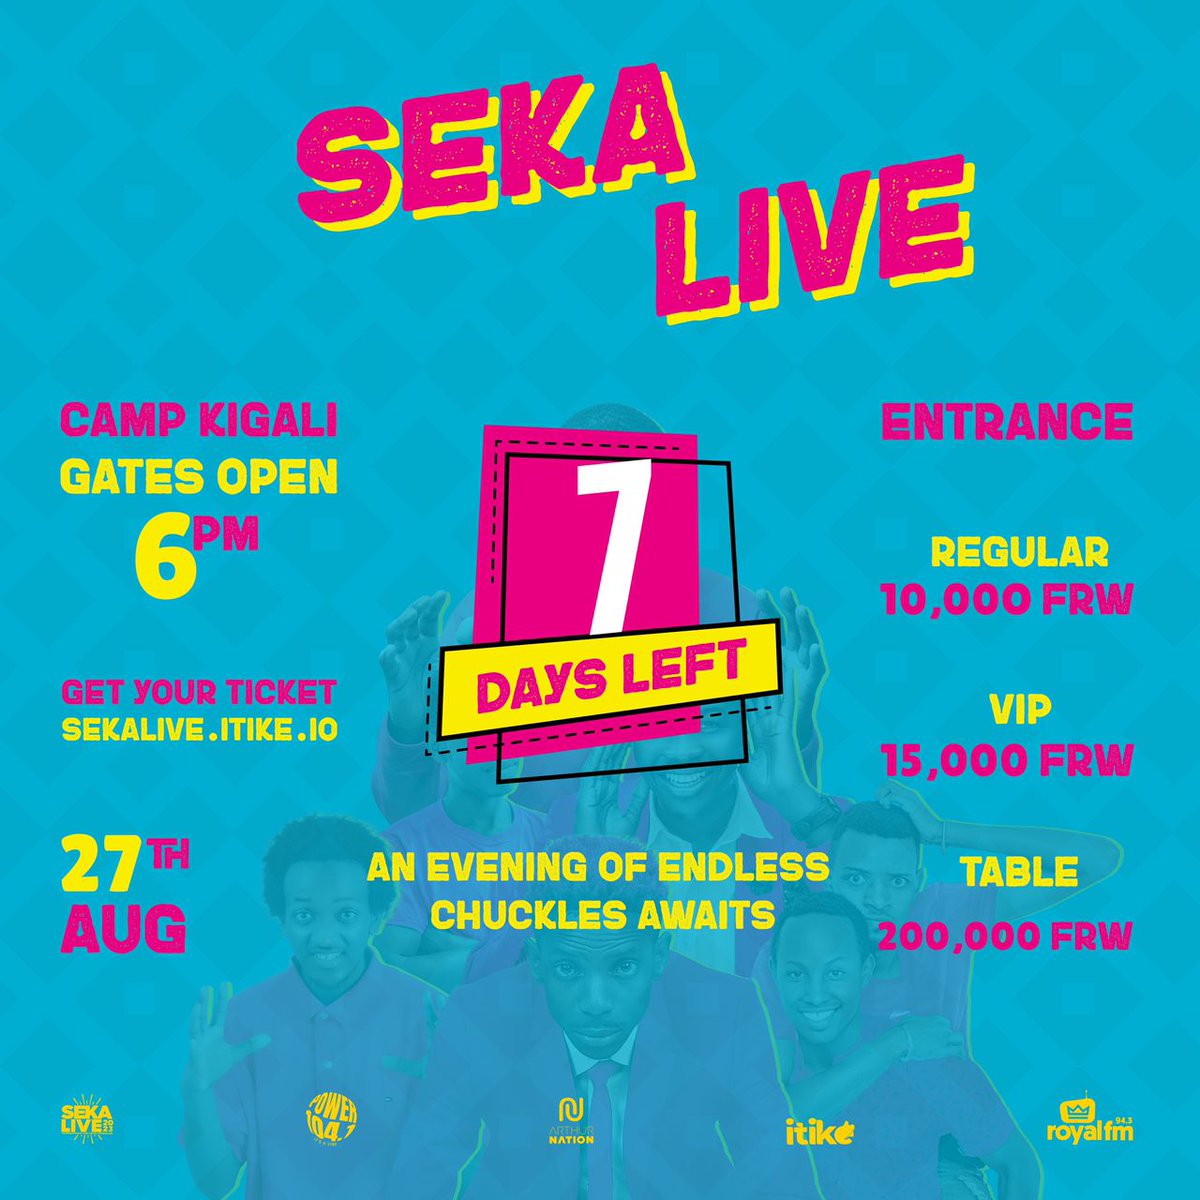 In just 7⃣ days, we will be laughing our hearts out at @sekaliverw with @loyisogola, @ericomondi_ & a host of other comedians from East Africa. Get ready to enjoy. Secure your tickets early from sekalive.itike.io. #SekaLive.